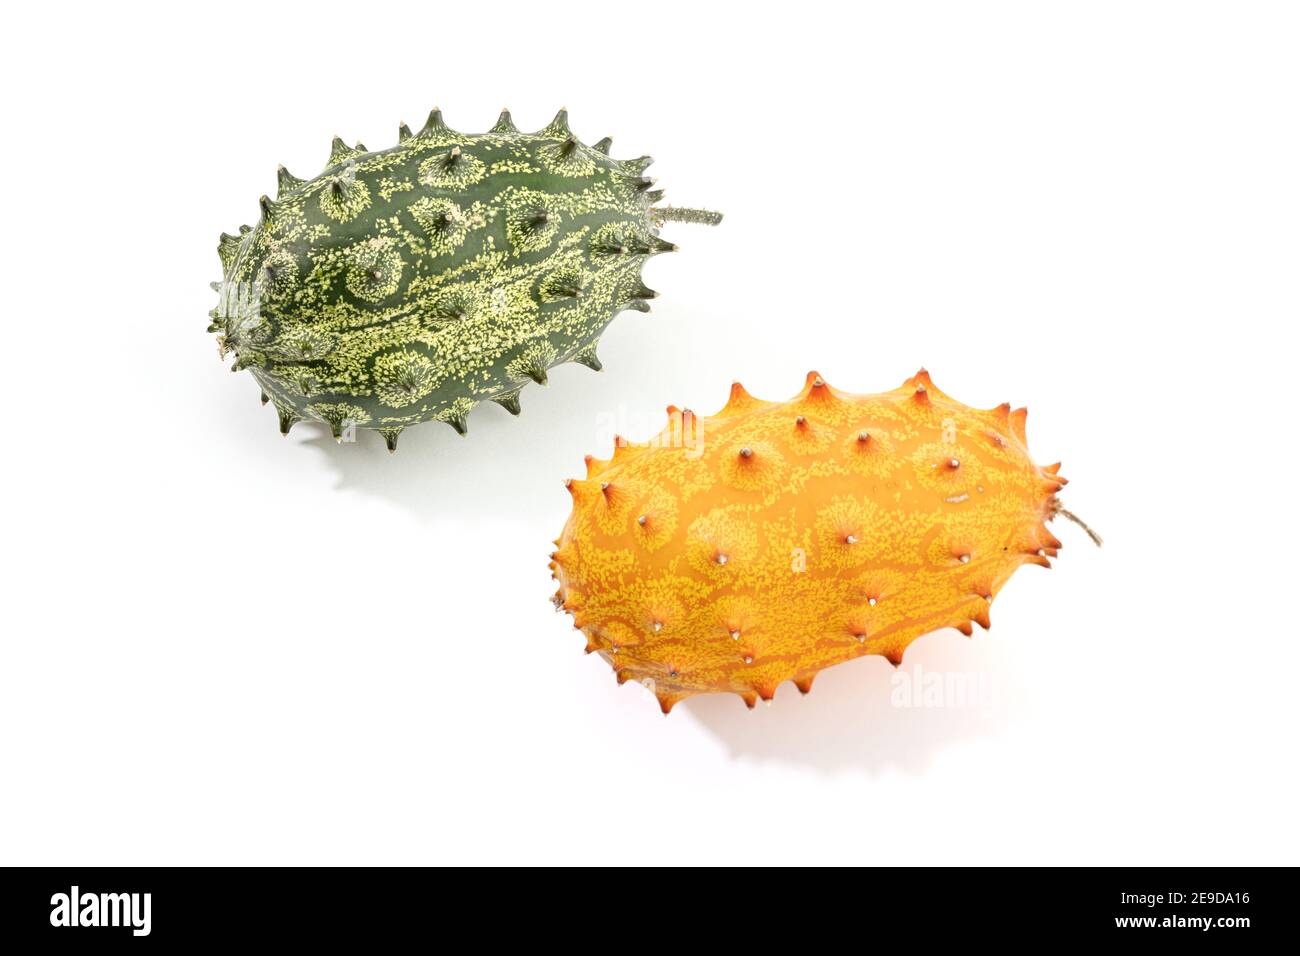 Green and Ripe Kiwano. Spiked or jelly melon isolated on white background. Stock Photo